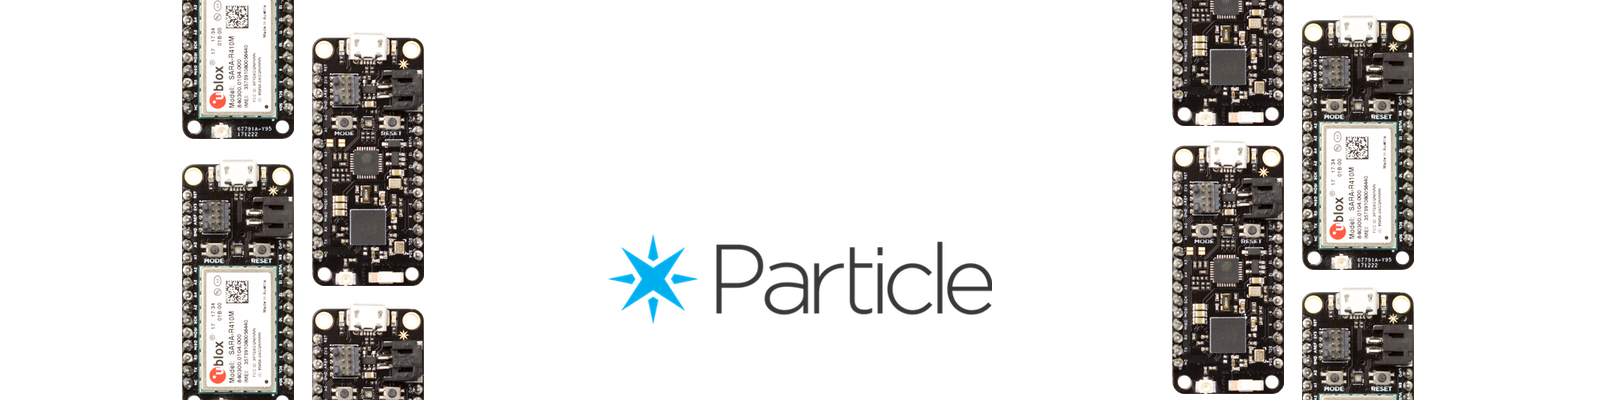 IoSP: The Internet of Solved Problems with Particle